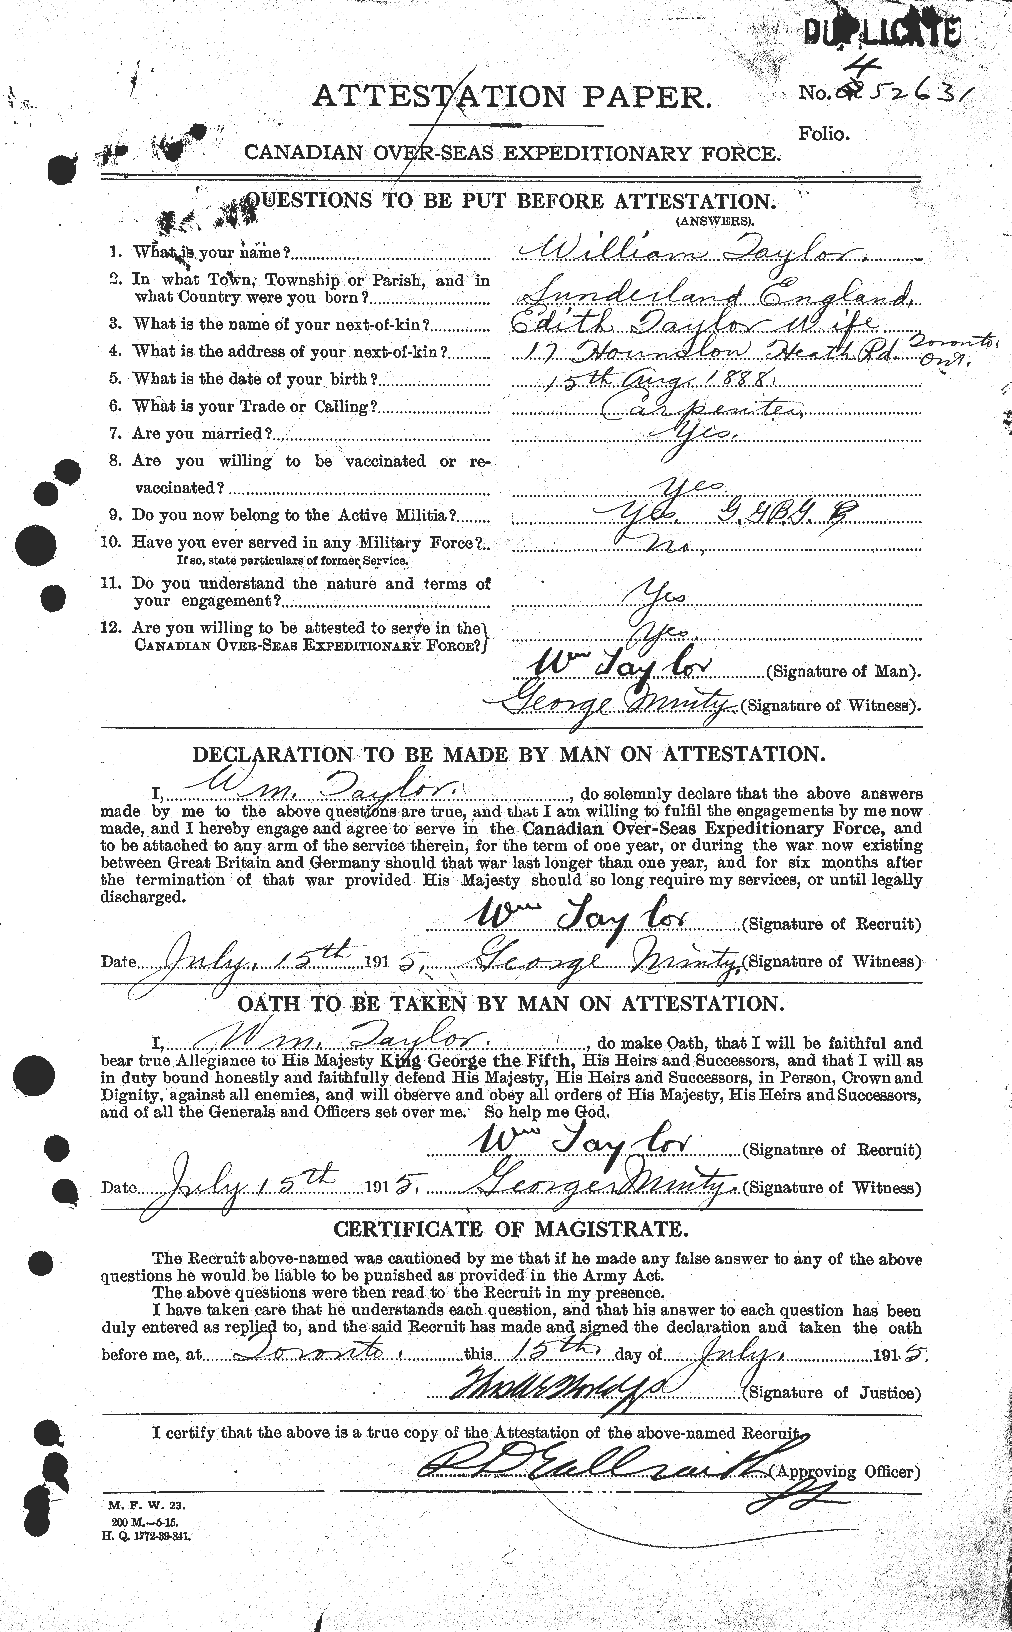 Personnel Records of the First World War - CEF 628100a